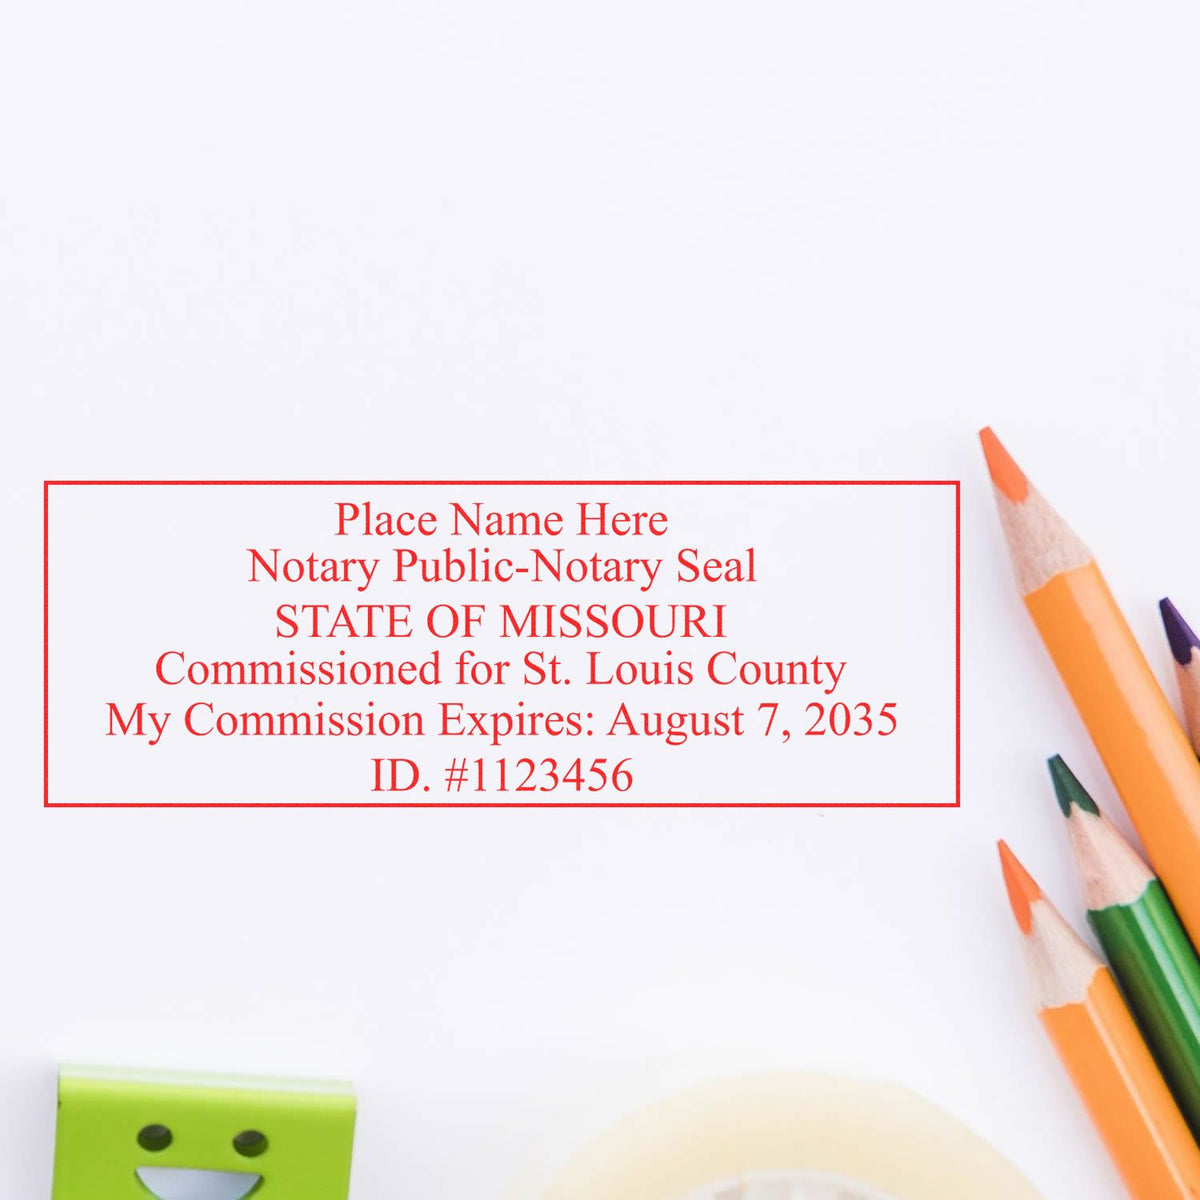 The Heavy-Duty Missouri Rectangular Notary Stamp stamp impression comes to life with a crisp, detailed photo on paper - showcasing true professional quality.